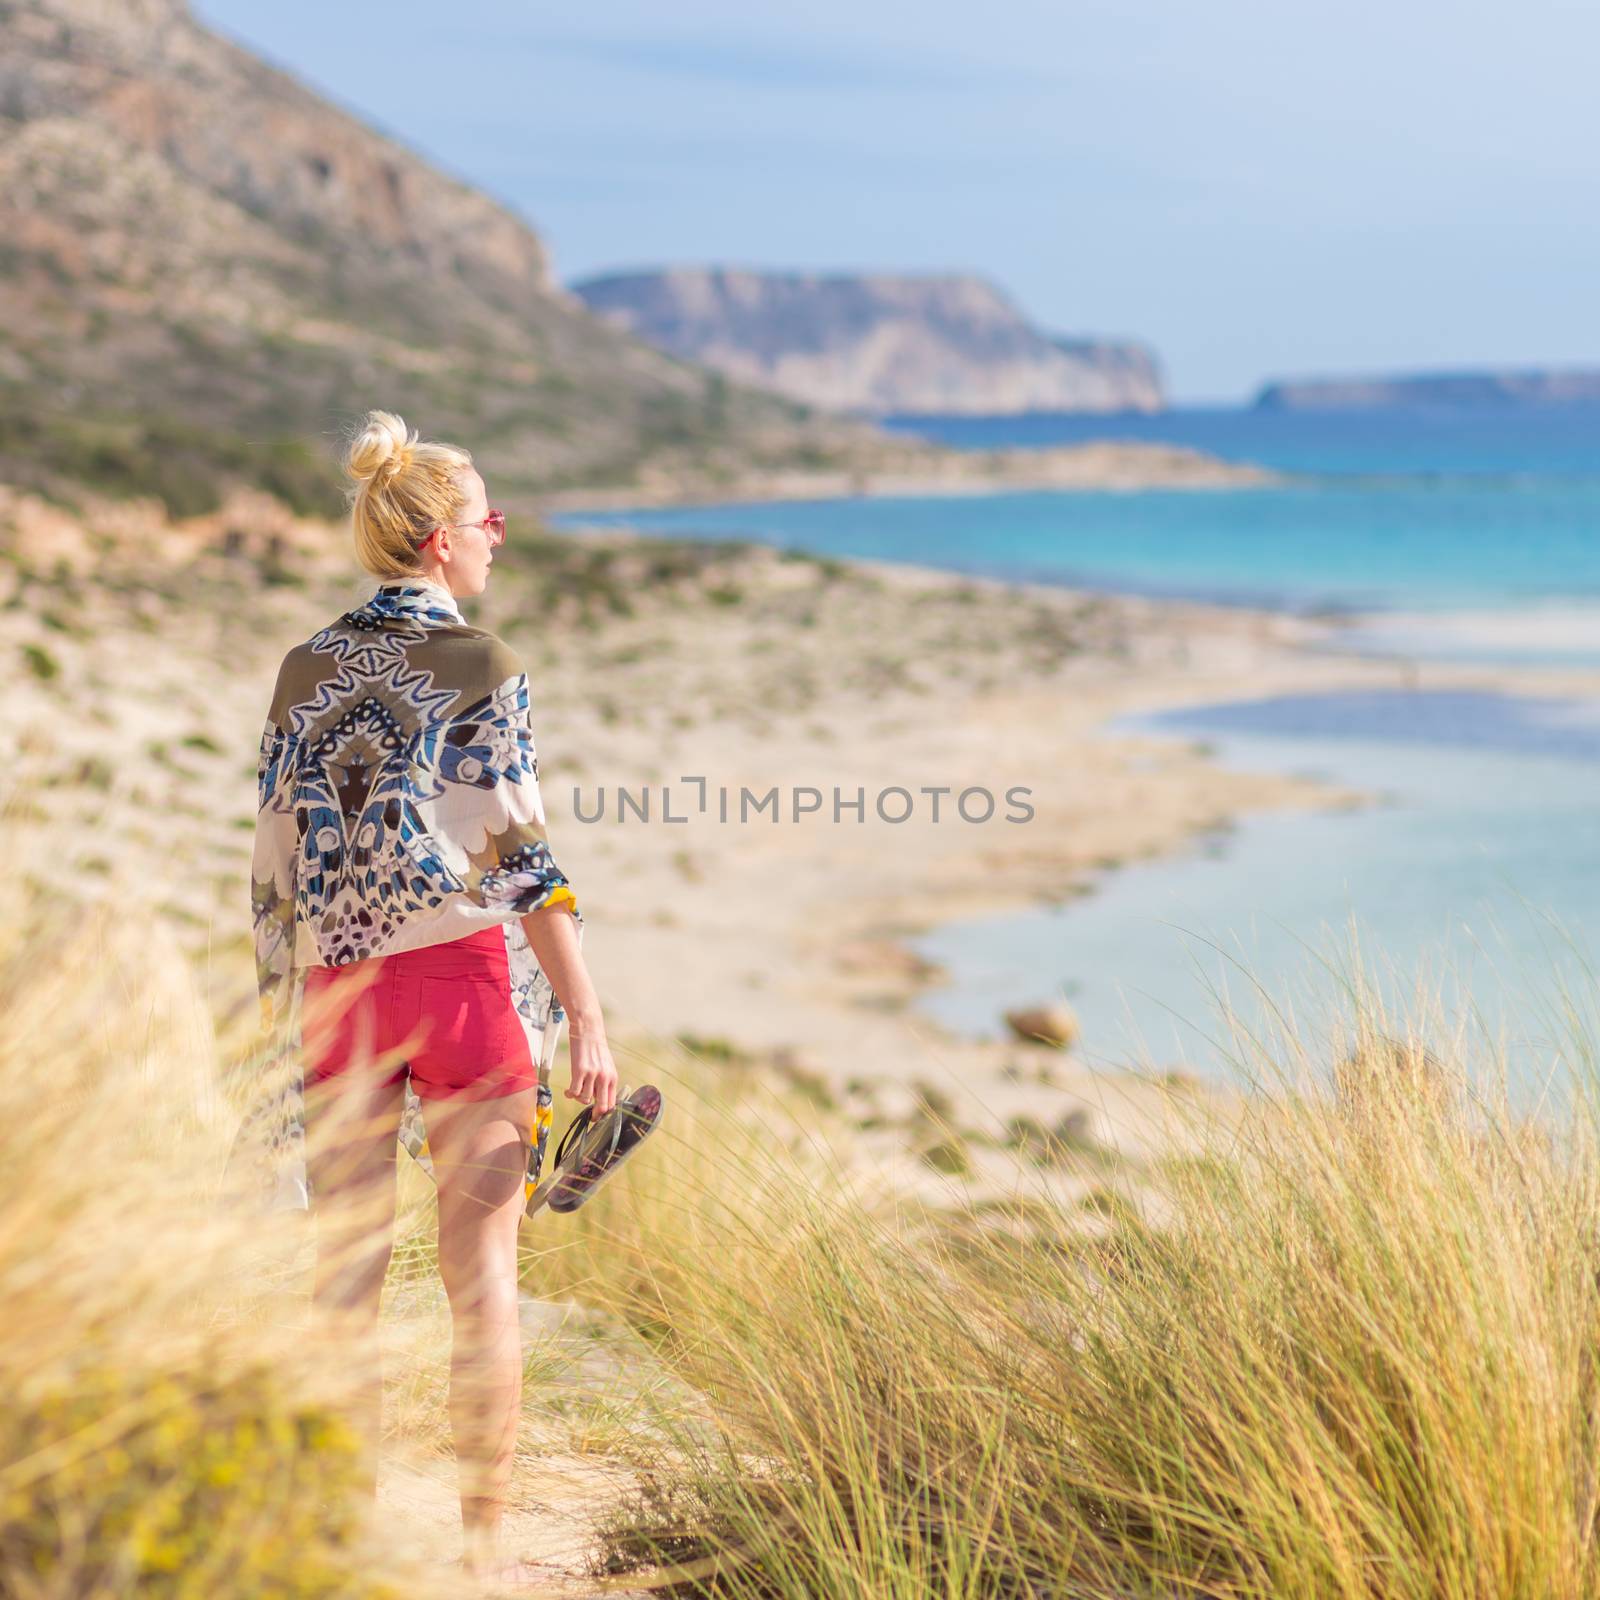 Relaxed woman wrapped in colorful scarf, enjoying sun, freedom and life at beautiful Balos beach in Greece. Concept of holidays, vacations, freedom, joy and well being.